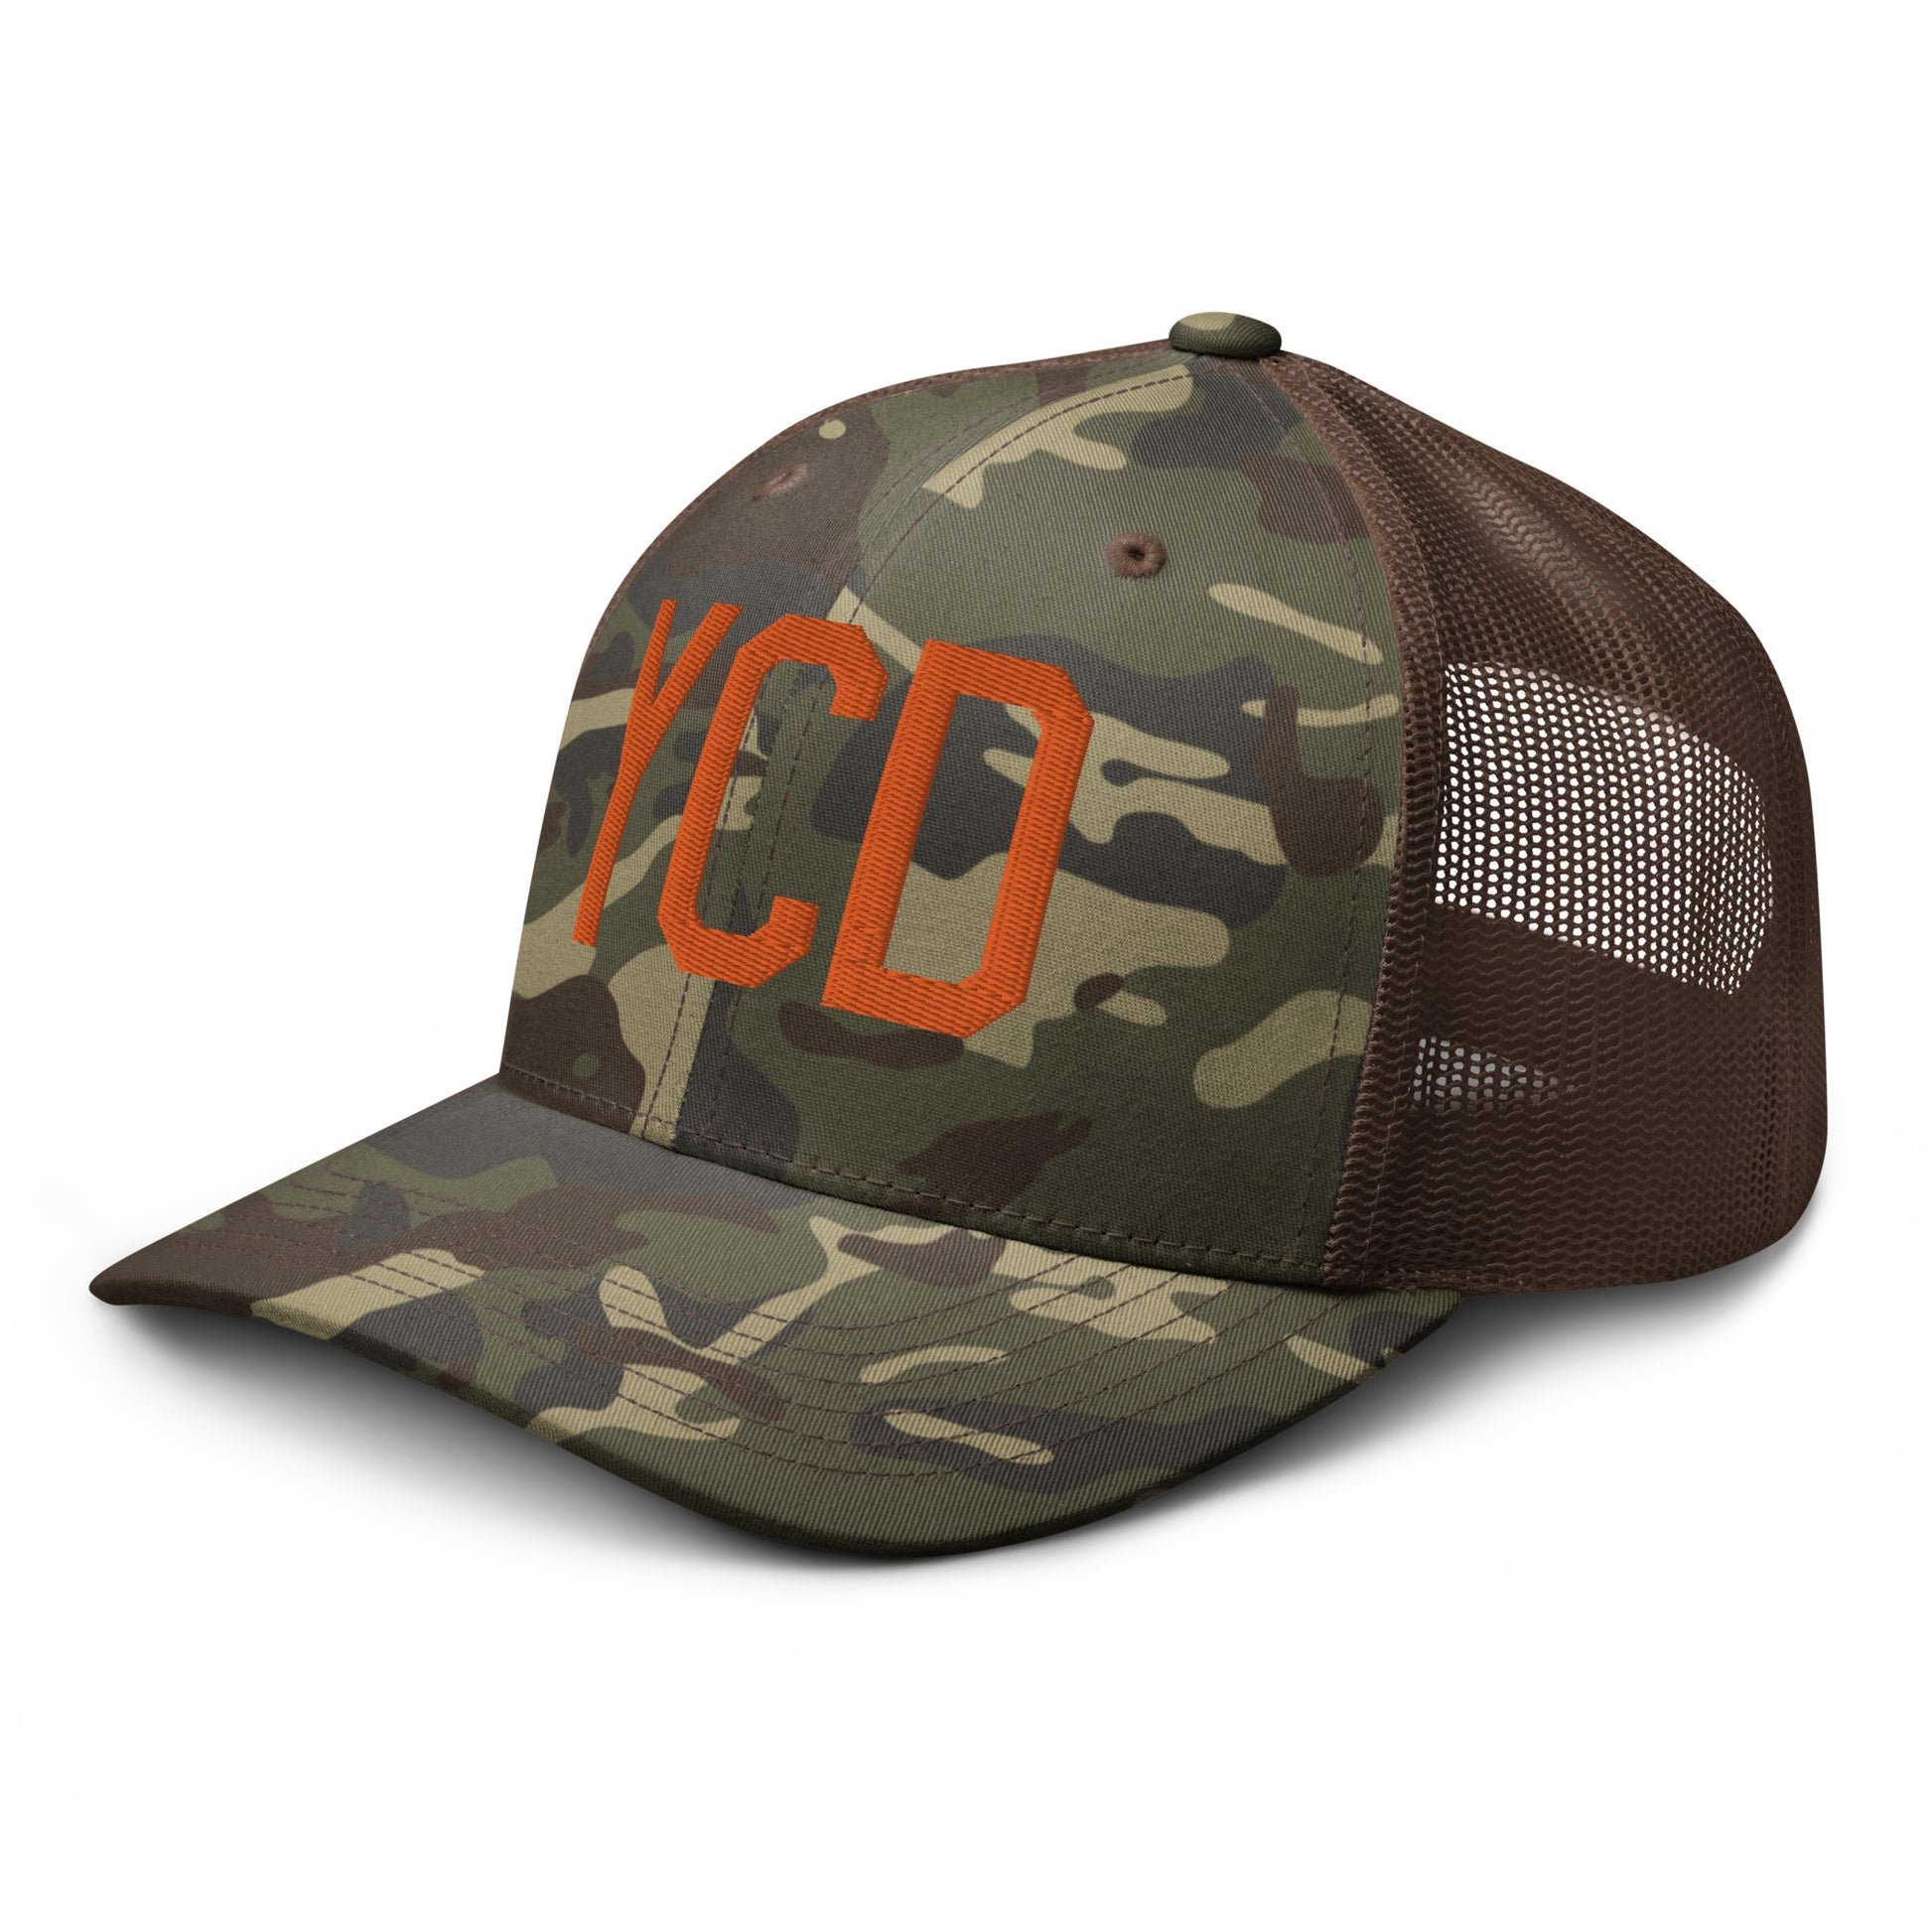 Airport Code Camouflage Trucker Hat - Orange • YCD Nanaimo • YHM Designs - Image 15